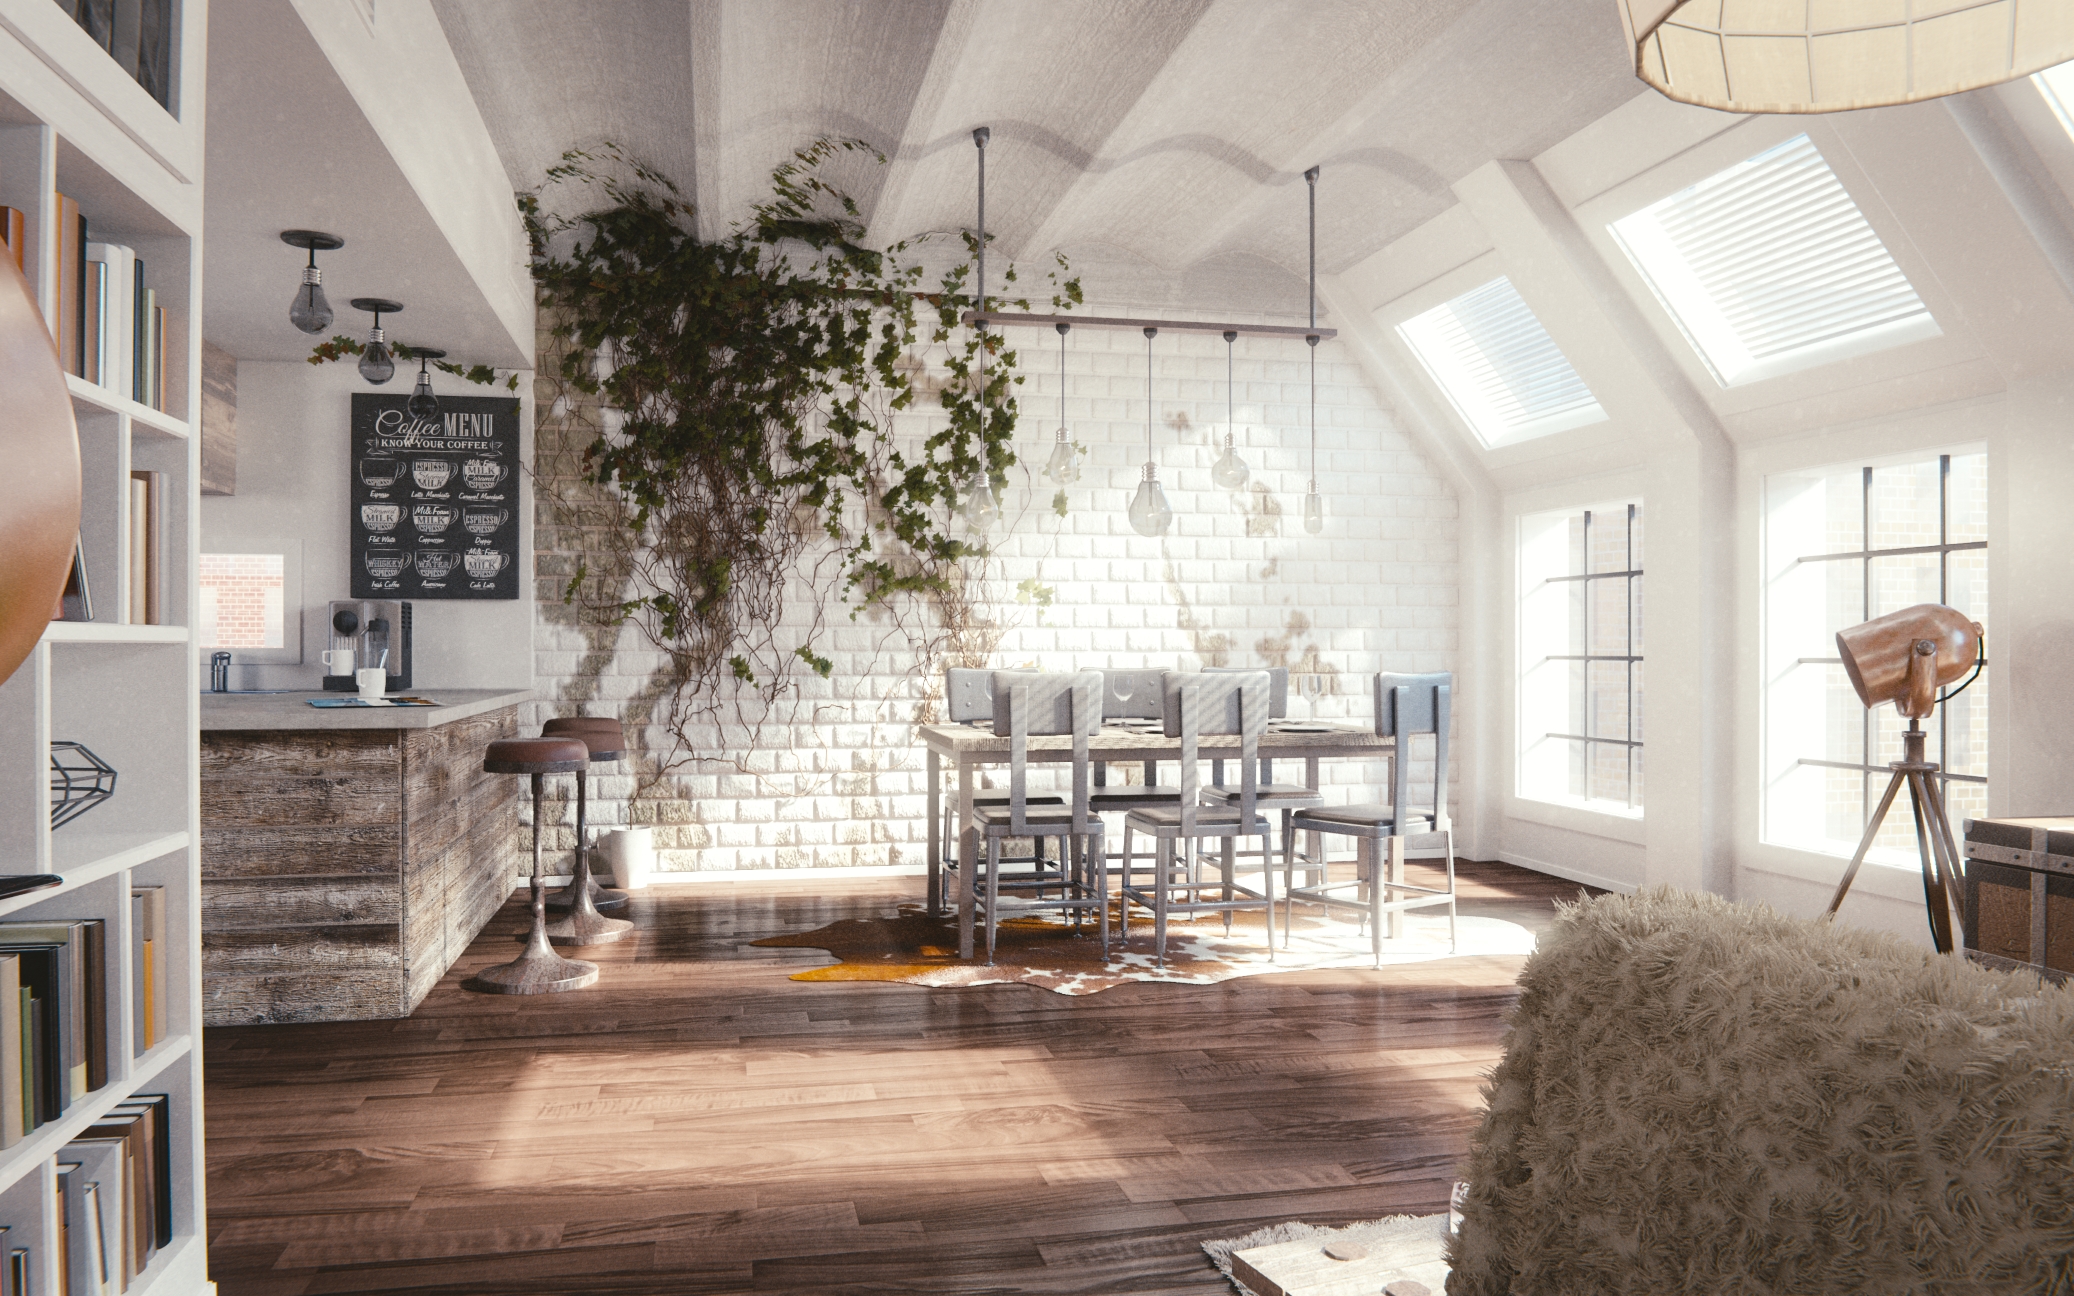 vieren Rijd weg Eed White loft apartment - Finished Projects - Blender Artists Community